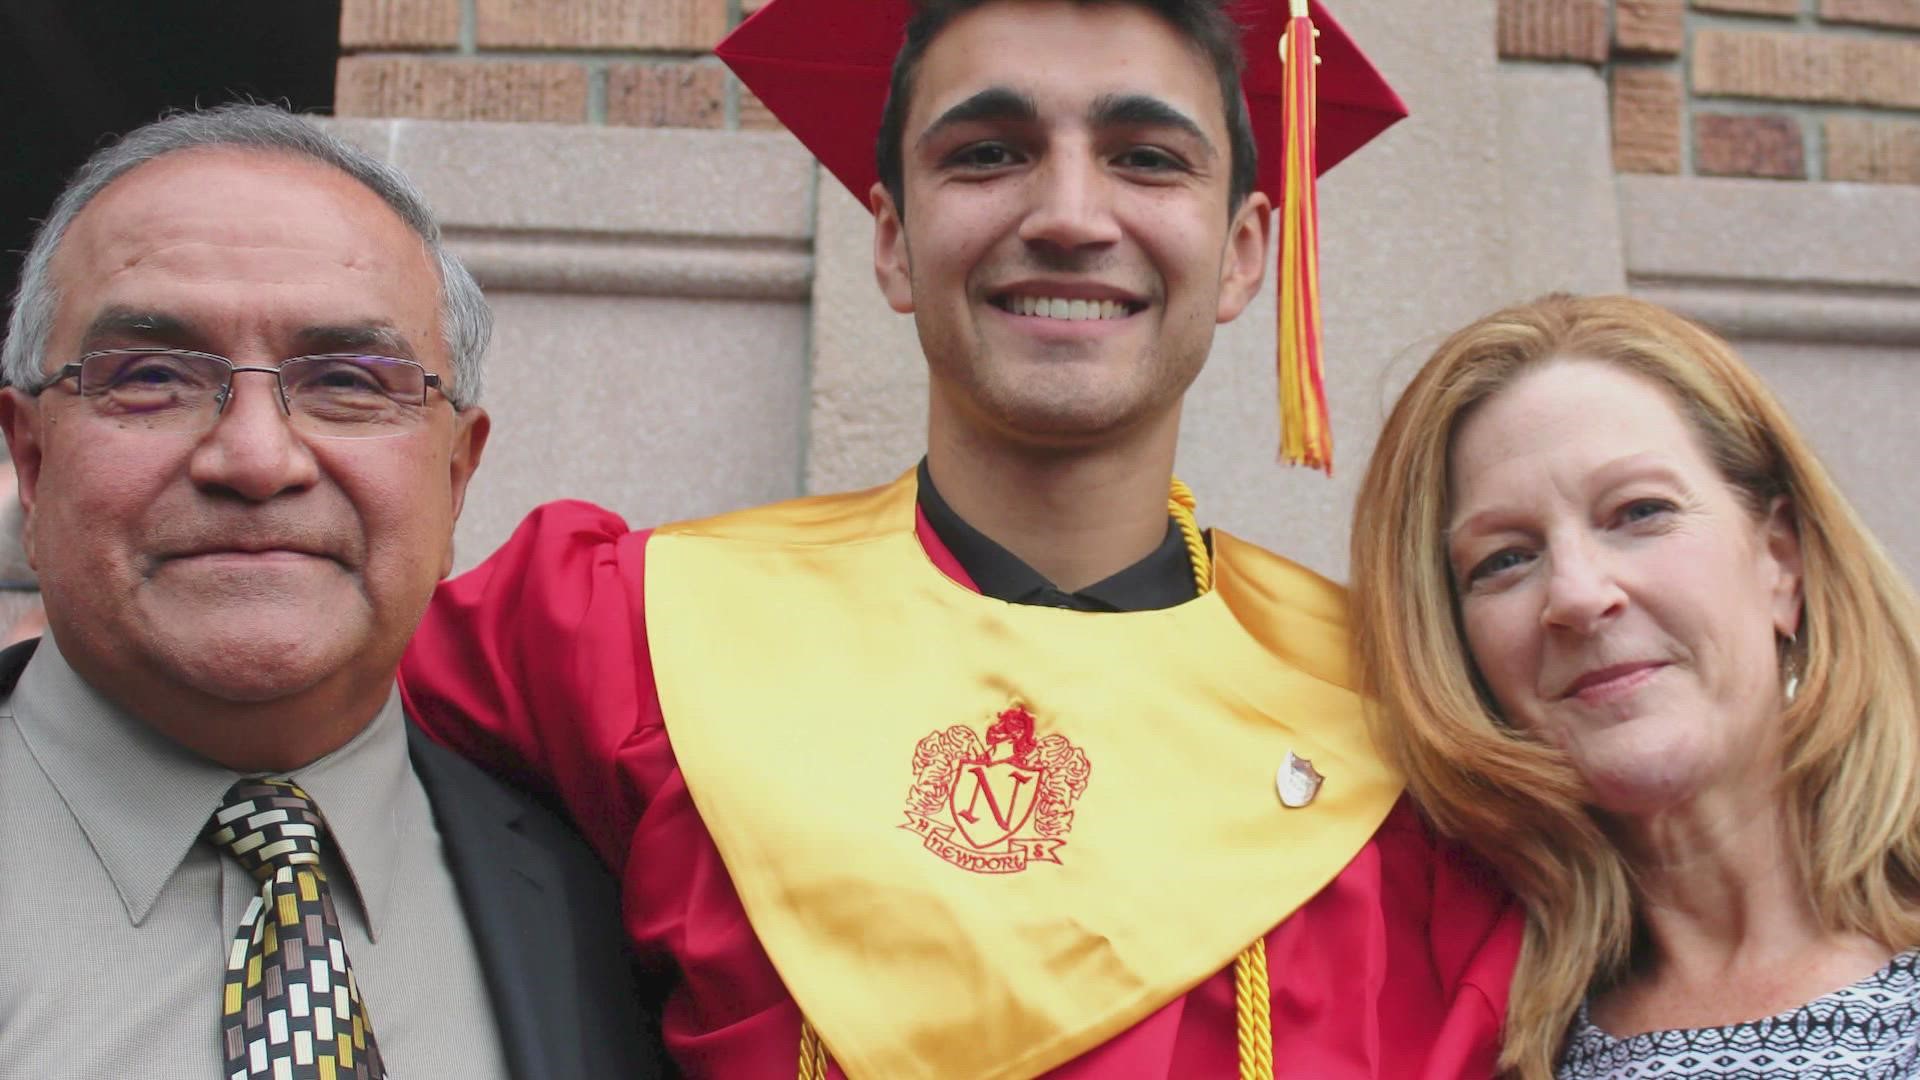 The parents of Sam Martinez, who died after a hazing incident at the WSU fraternity ATO, urge other families to do research before choosing a campus club.